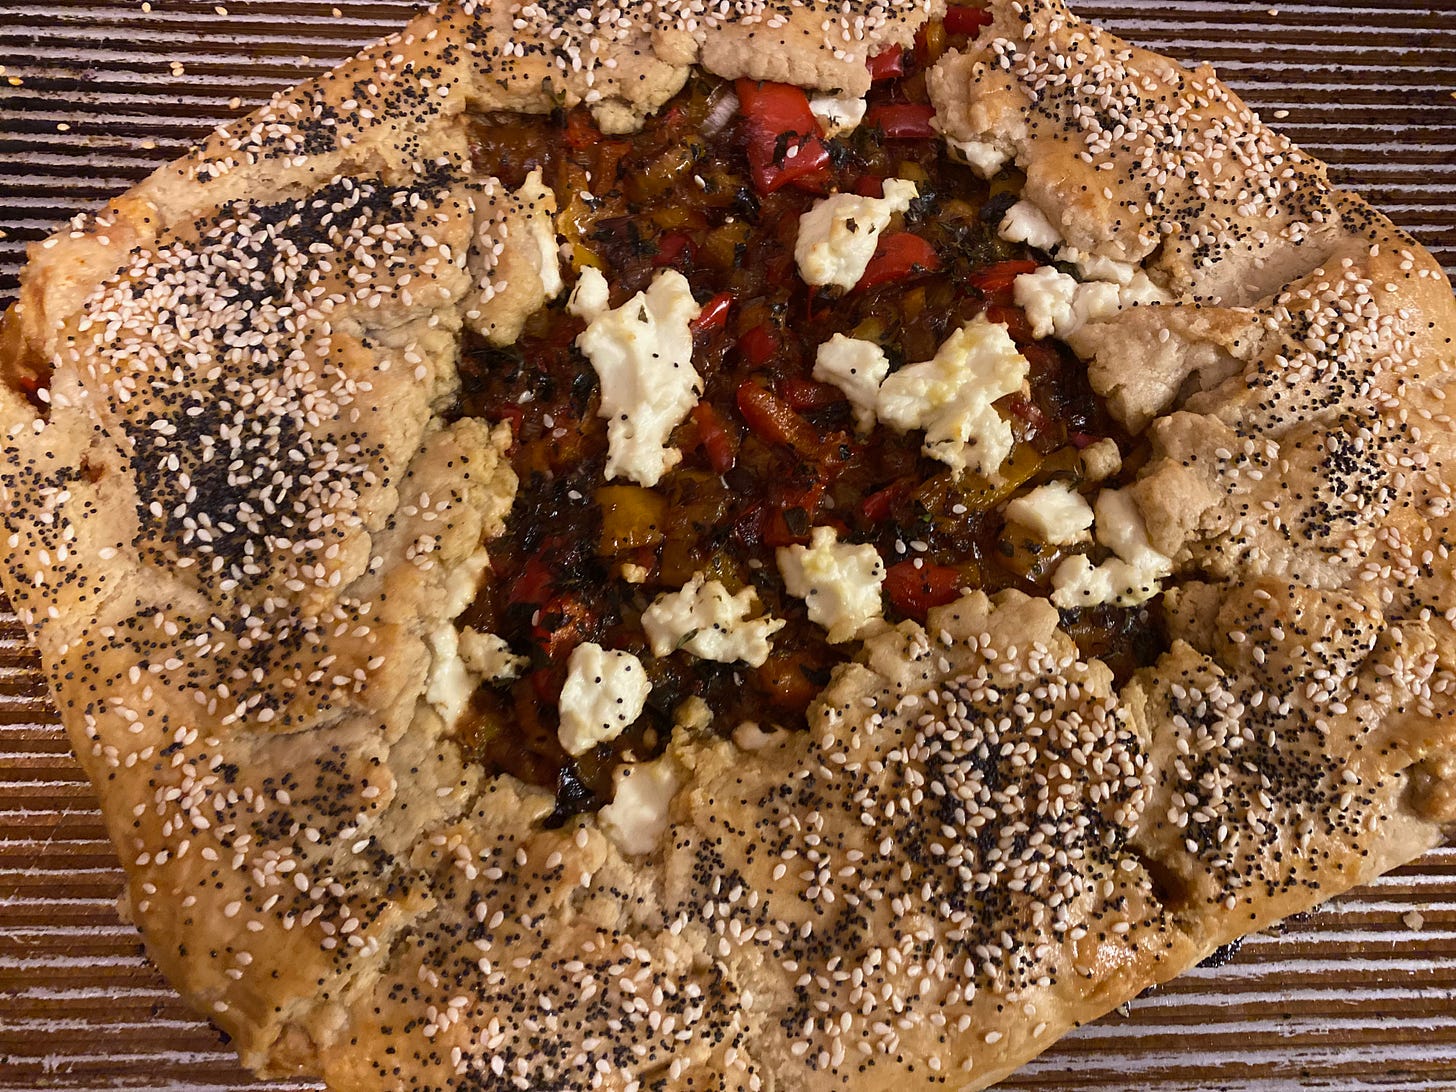 A red pepper galette covered in sesame and poppy seeds sits on a baking tray.